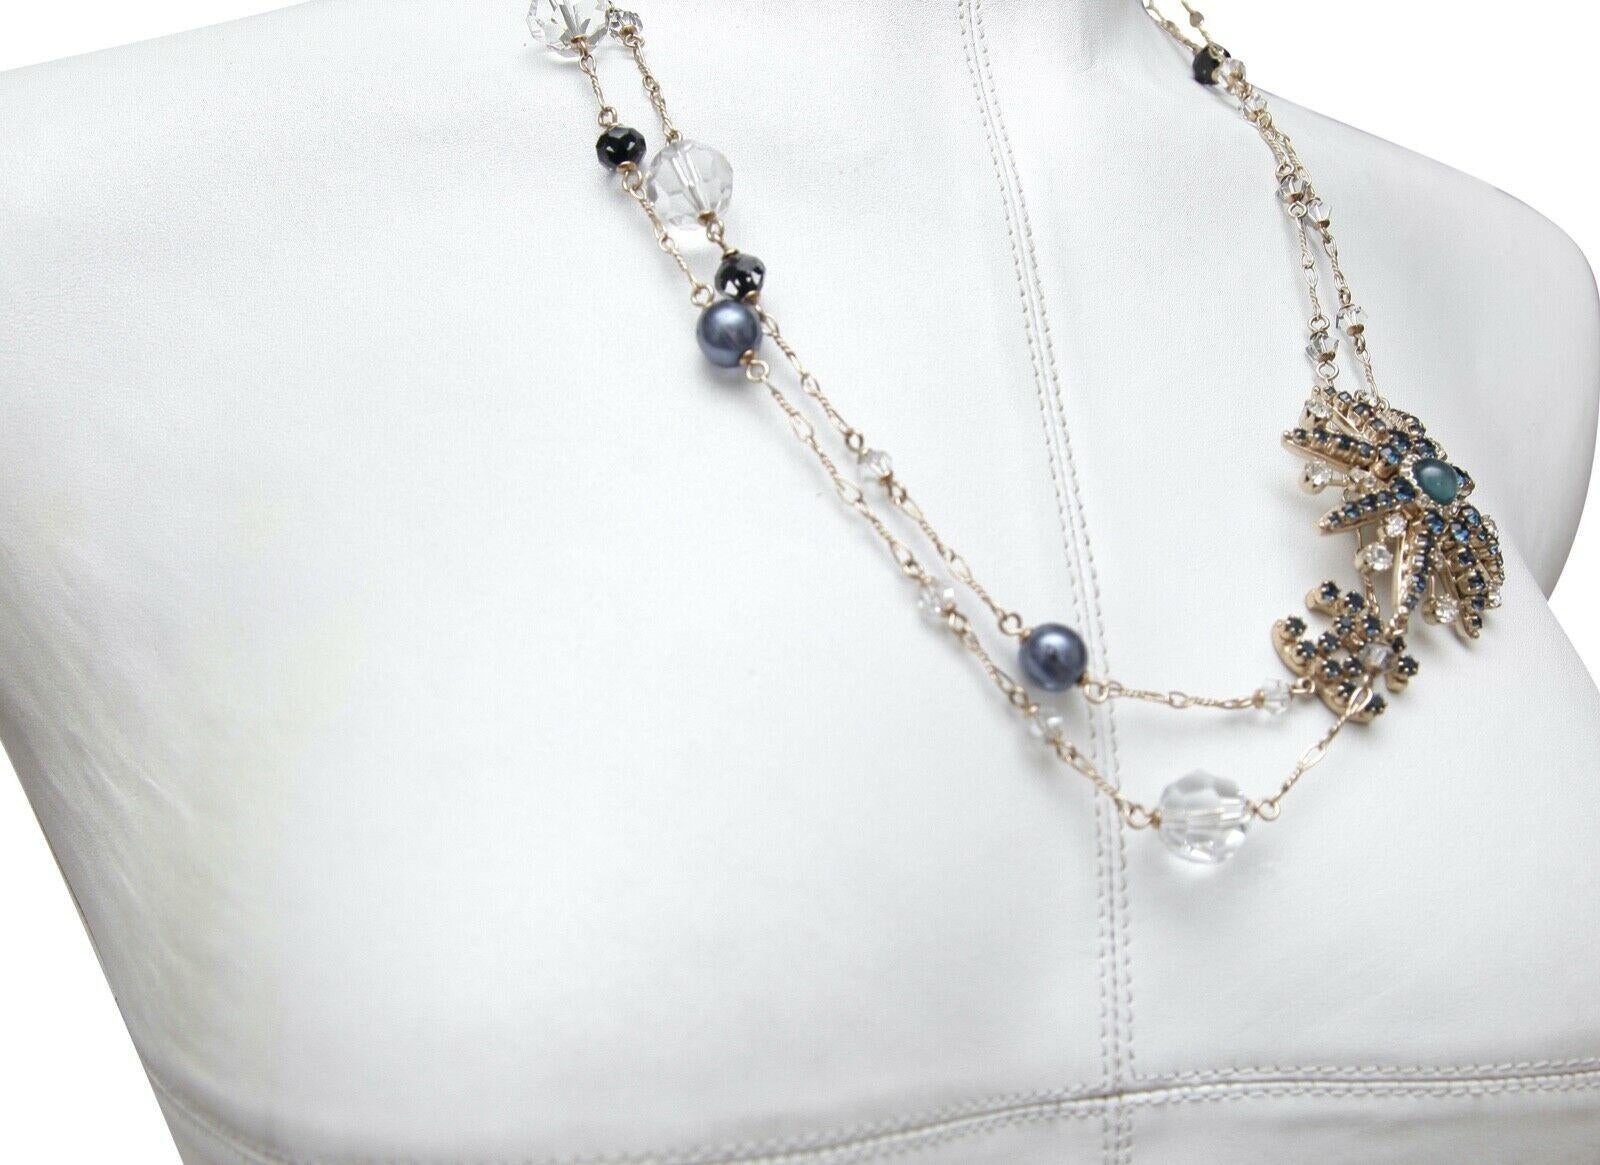 CHANEL Necklace Gold Blue White Crystals Starburst Pearls Charm Chain 2010 In Good Condition For Sale In Hollywood, FL